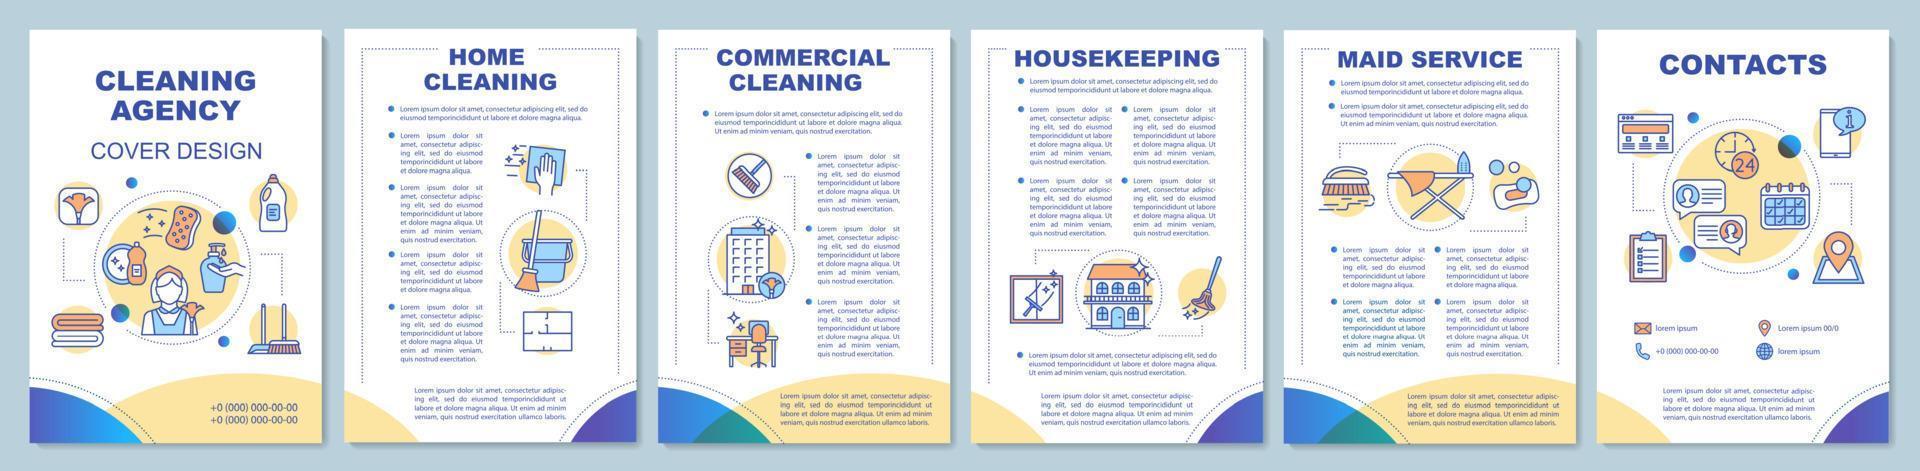 Cleaning agency brochure template layout. Housekeeping. Maid service. Flyer, booklet, leaflet print design, linear illustrations. Vector page layouts for magazines, annual reports, advertising posters